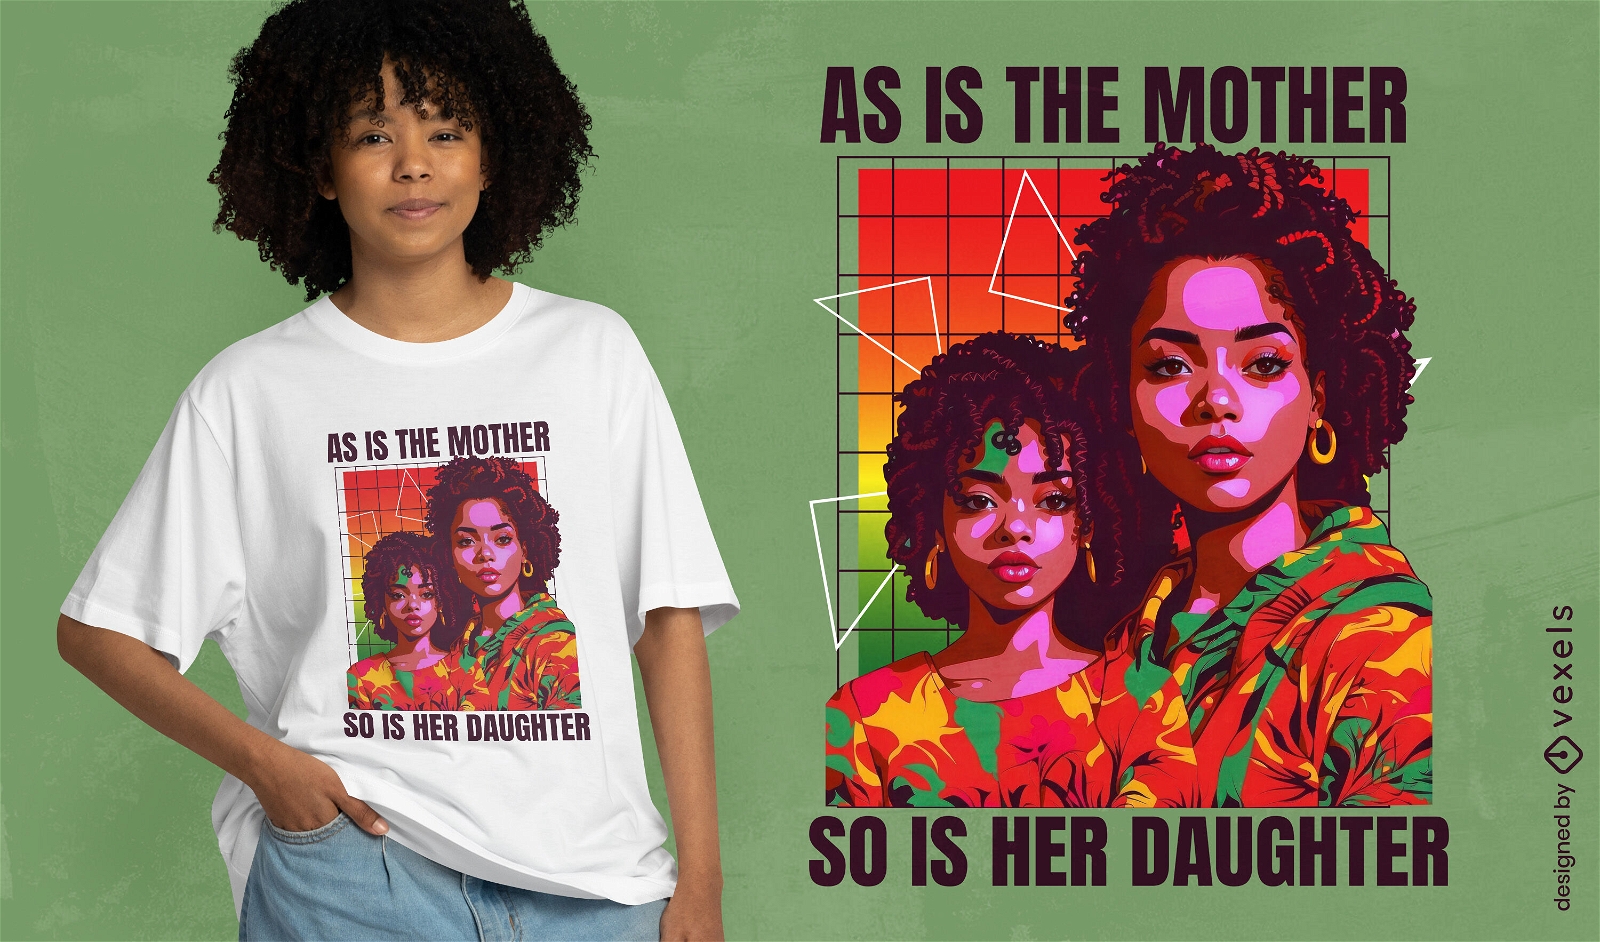 Inspirational mother and daughter quote t-shirt design